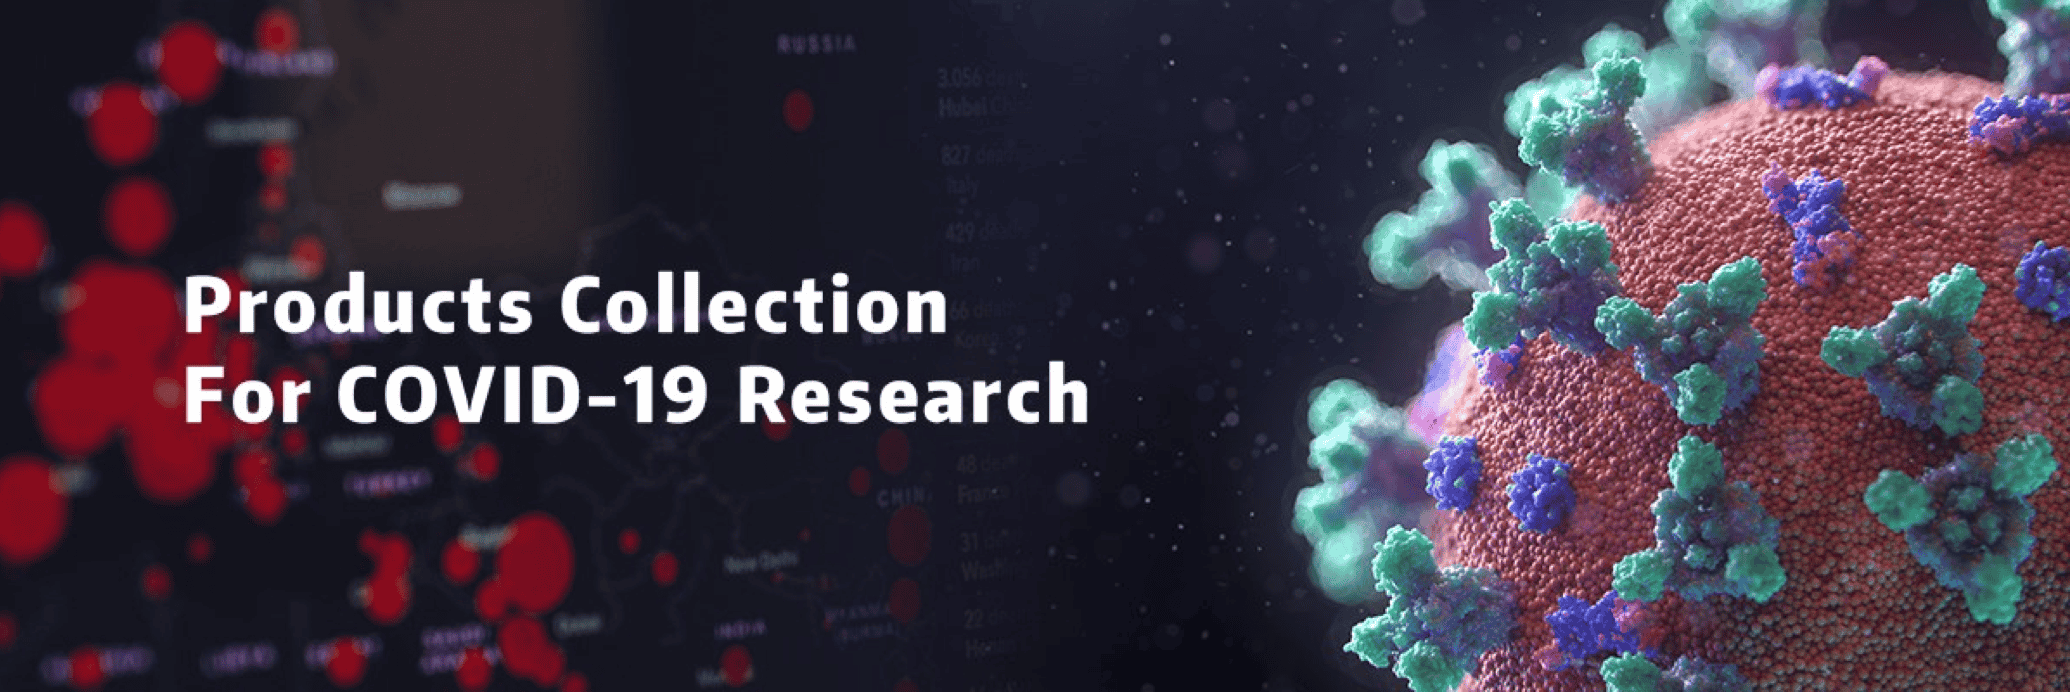 TargetMol releases the products collection for COVID-19 research